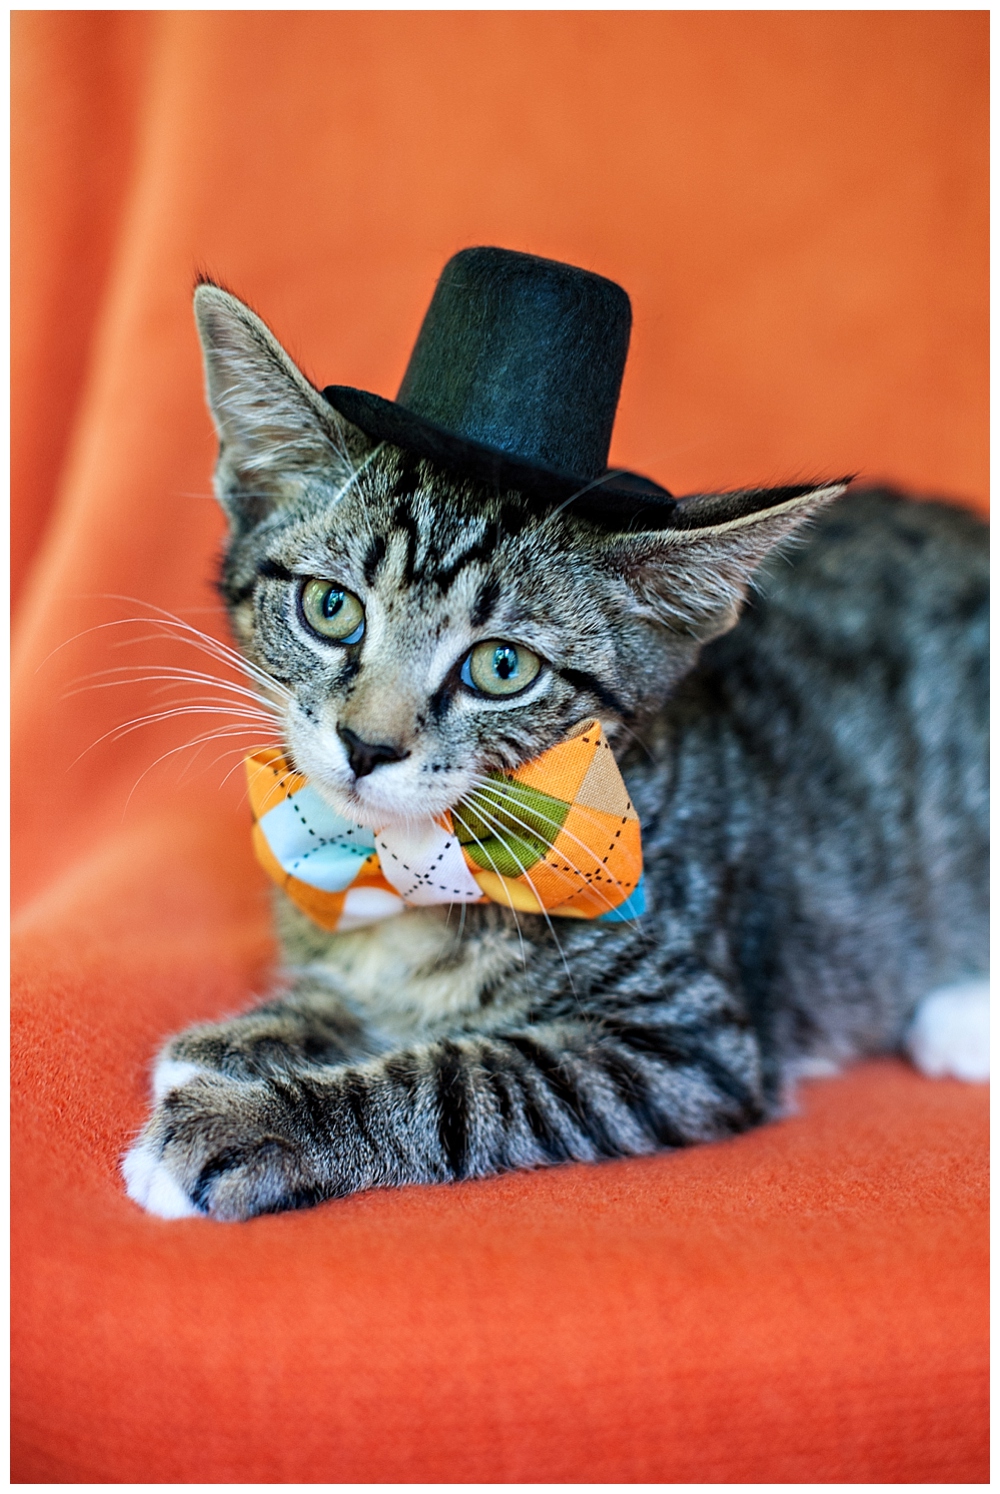 tiger striped kitten with a bow tie and top hat